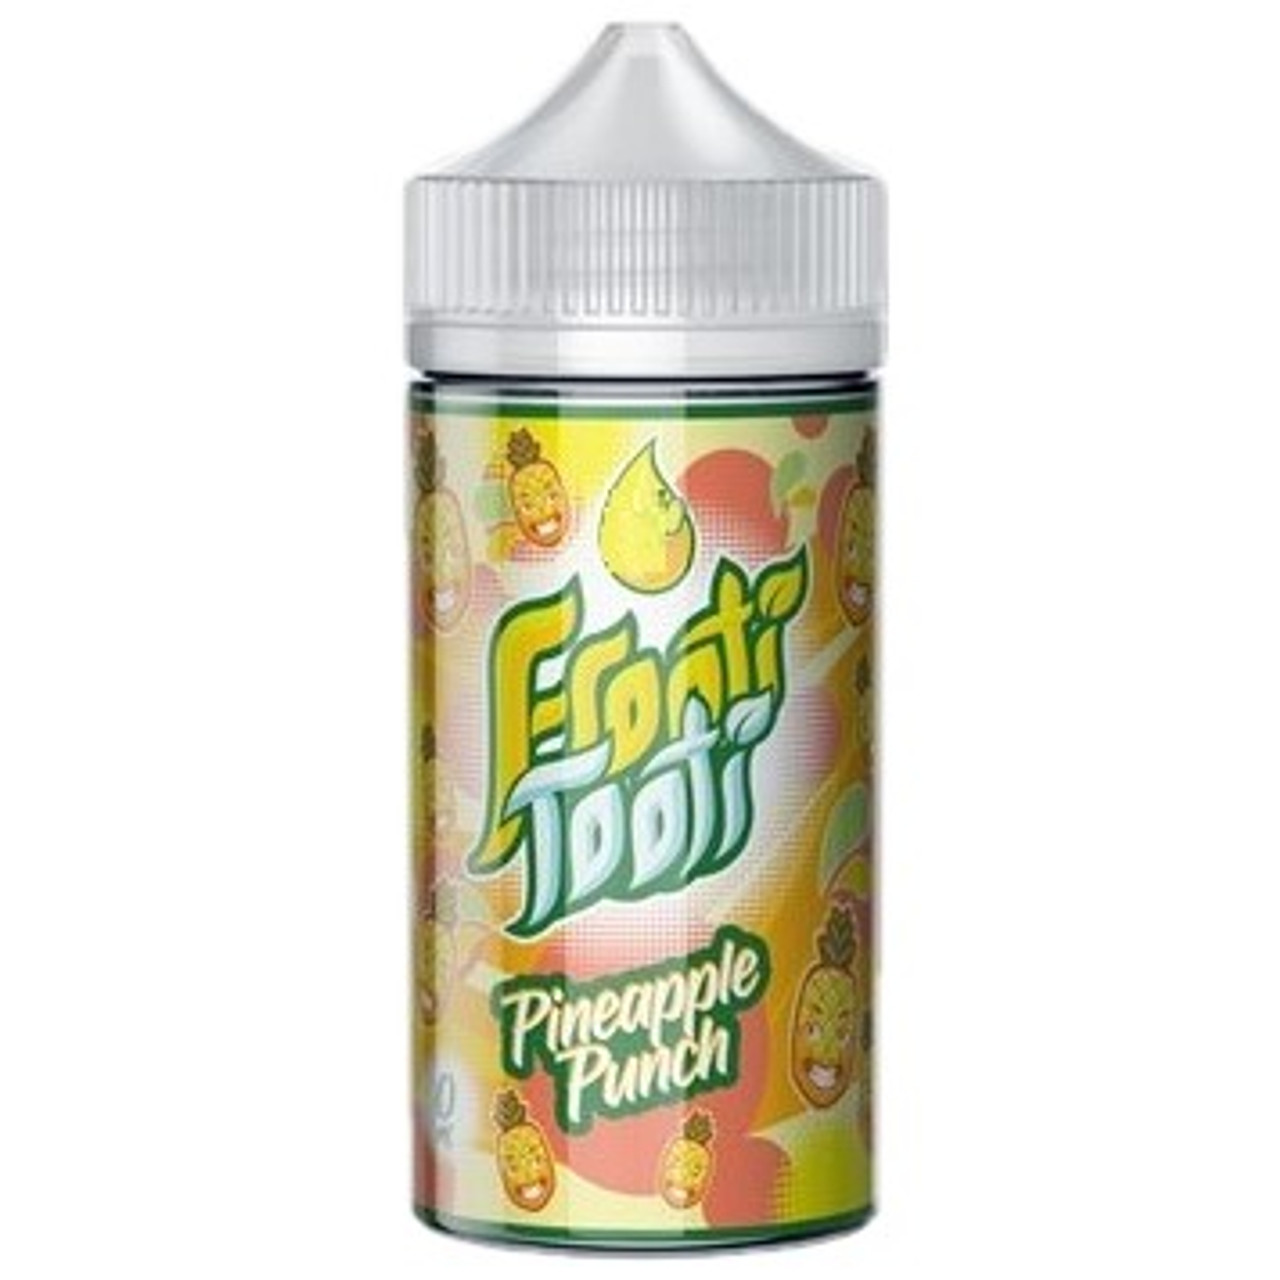 Product Image Of Pineapple Punch 100Ml Shortfill E-Liquid By Frooti Tooti